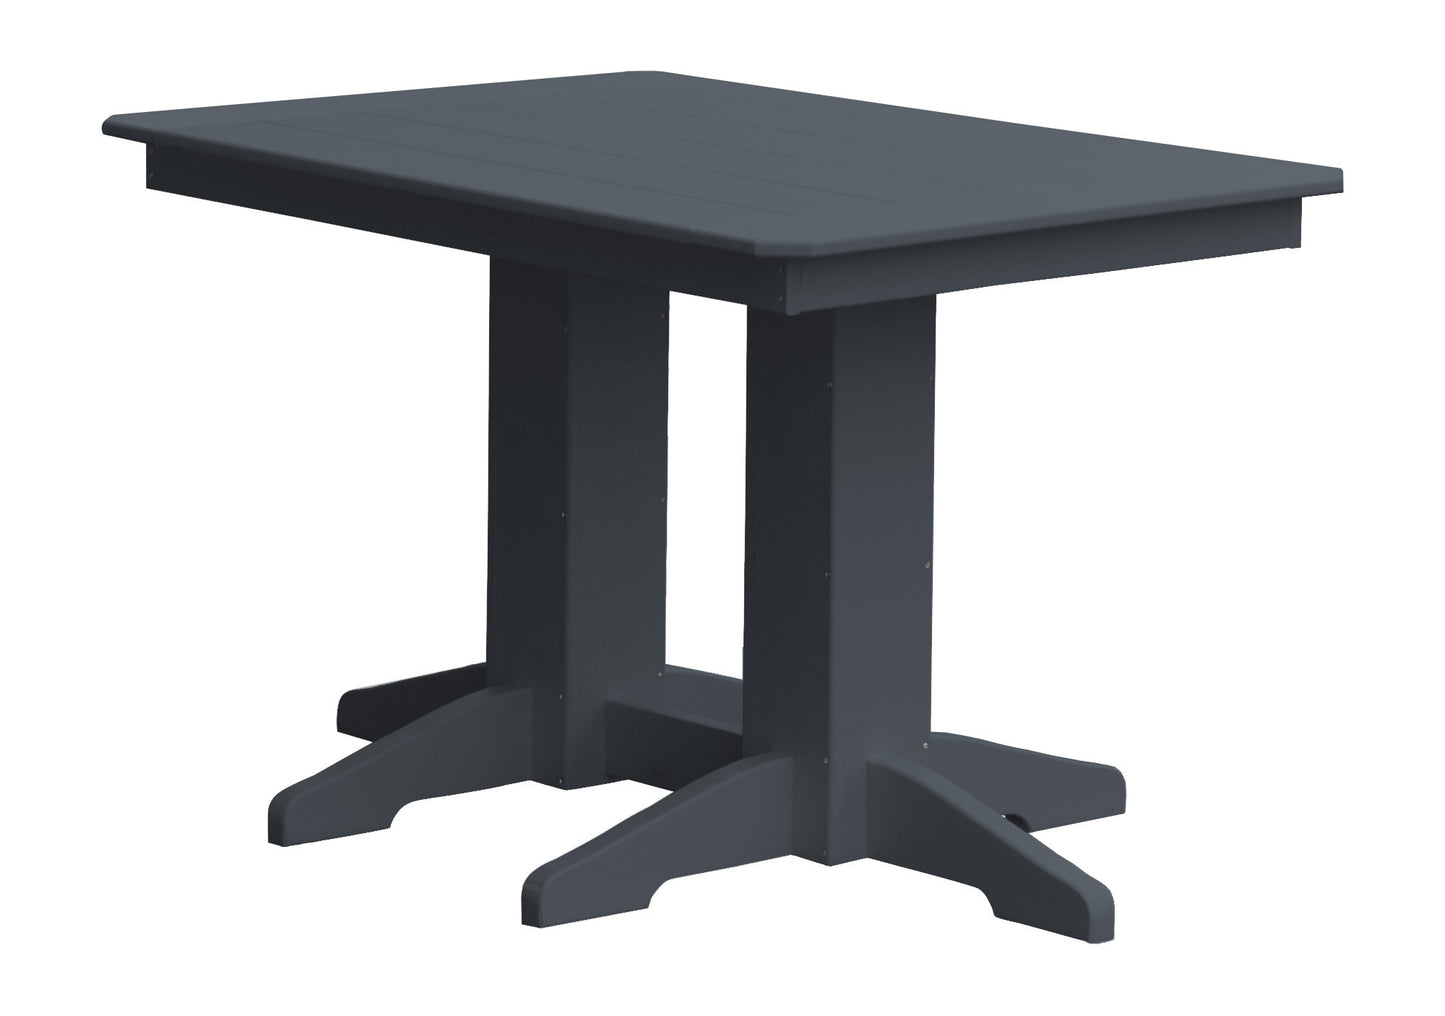 A&L Furniture Company Recycled Plastic 4' Dining Table - Dark Gray